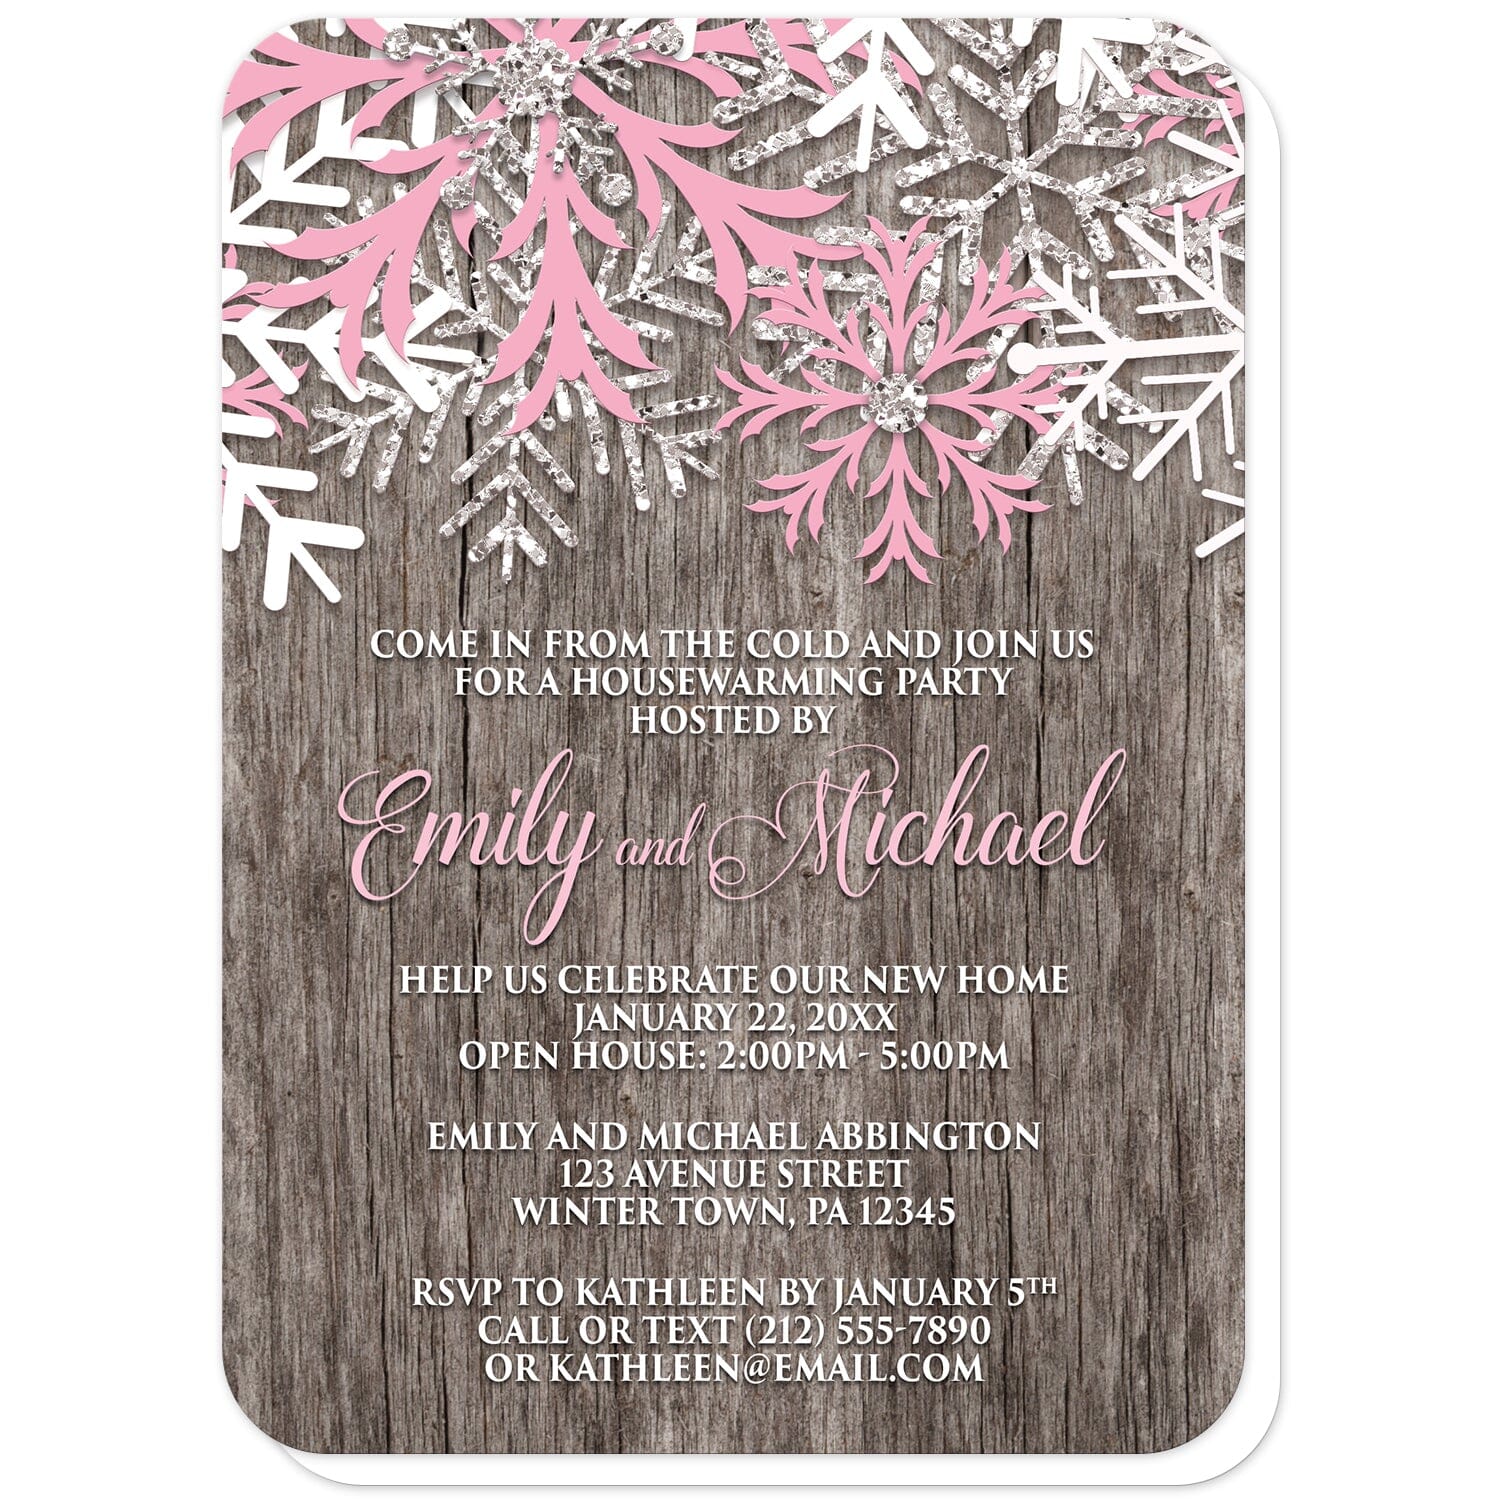 Rustic Winter Wood Pink Snowflake Housewarming Invitations (with rounded corners) at Artistically Invited. Country-inspired rustic winter wood pink snowflake housewarming invitations designed with pink, white, and silver-colored glitter-illustrated snowflakes along the top over a rustic wood pattern illustration. Your personalized housewarming celebration details are custom printed in pink and white over the wood background below the snowflakes.